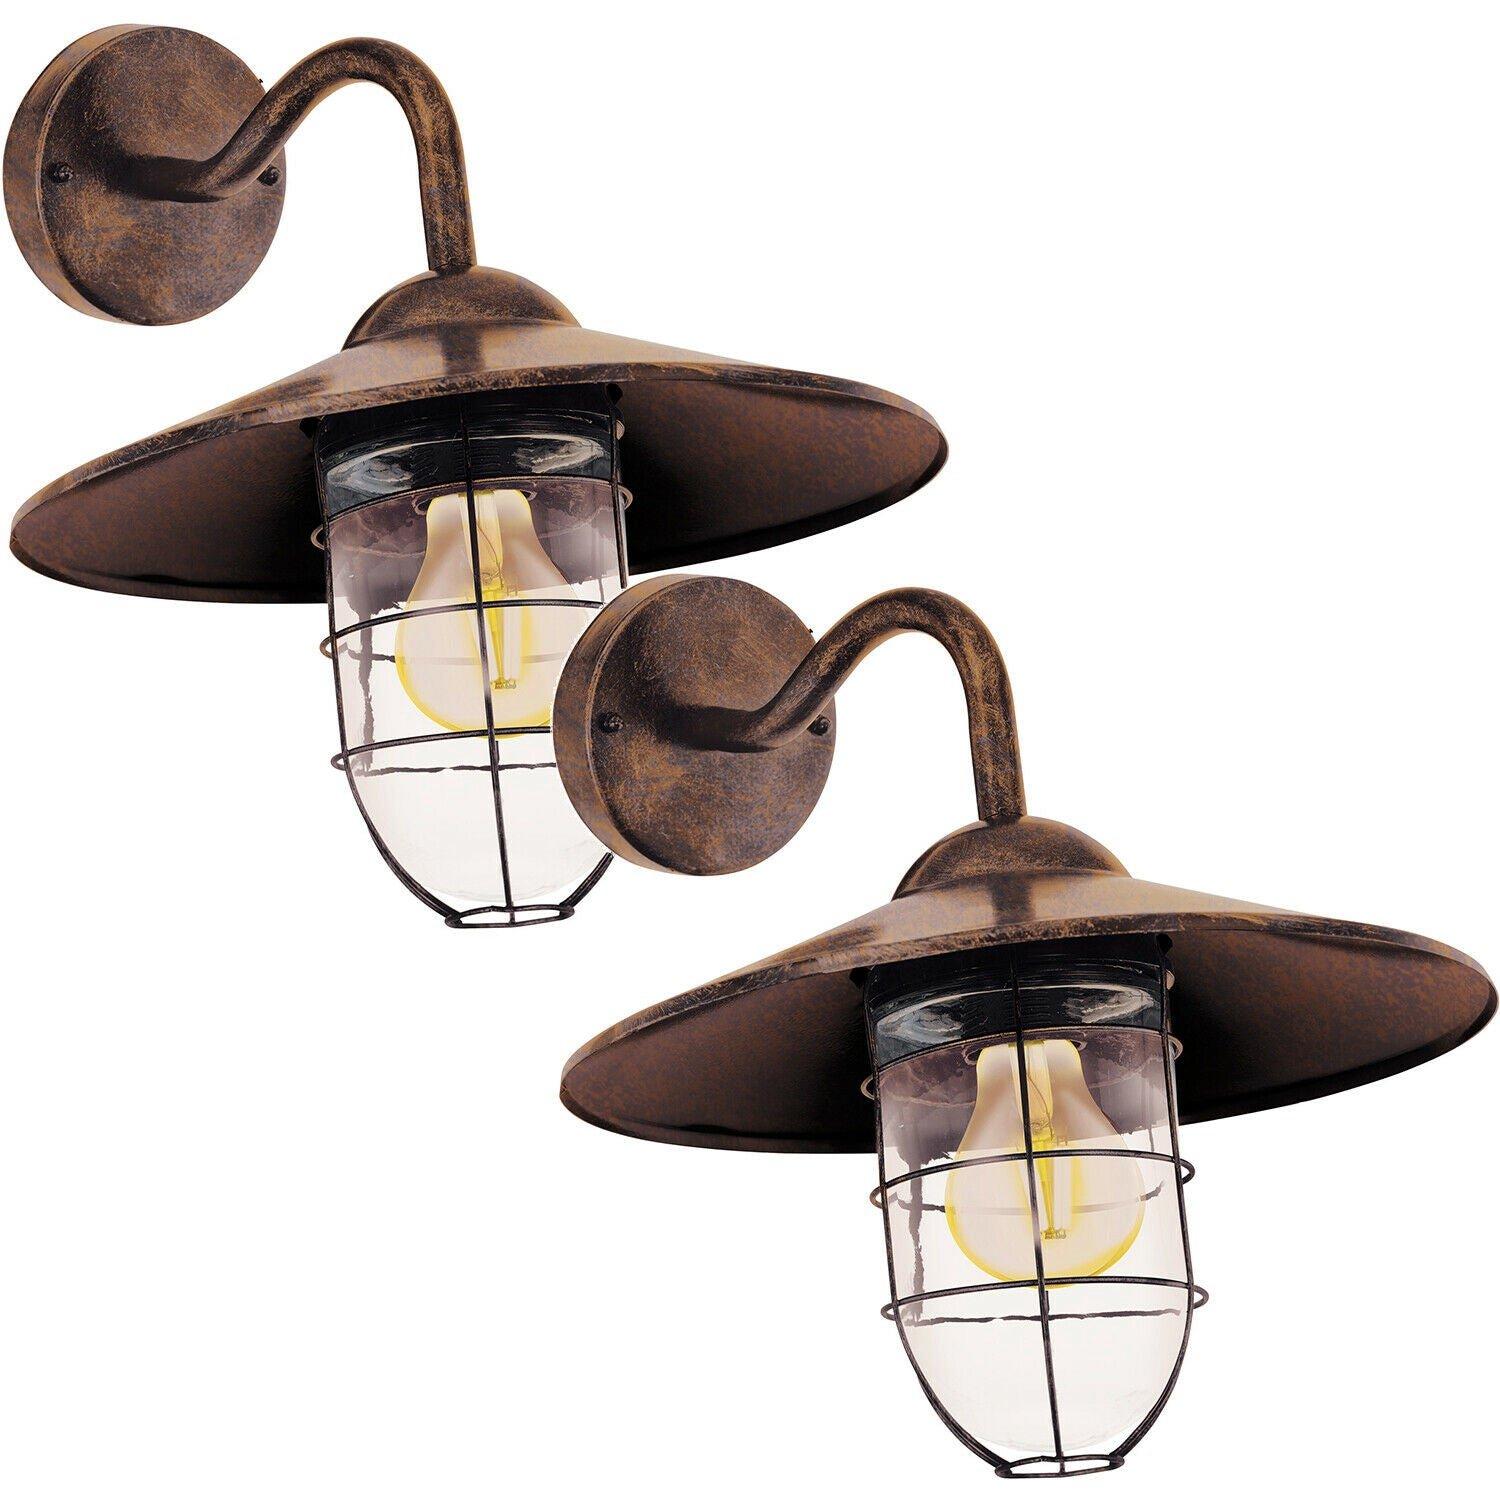 2 PACK IP44 Outdoor Wall Light Antique Copper Shade Fisherman Lamp 60W E27